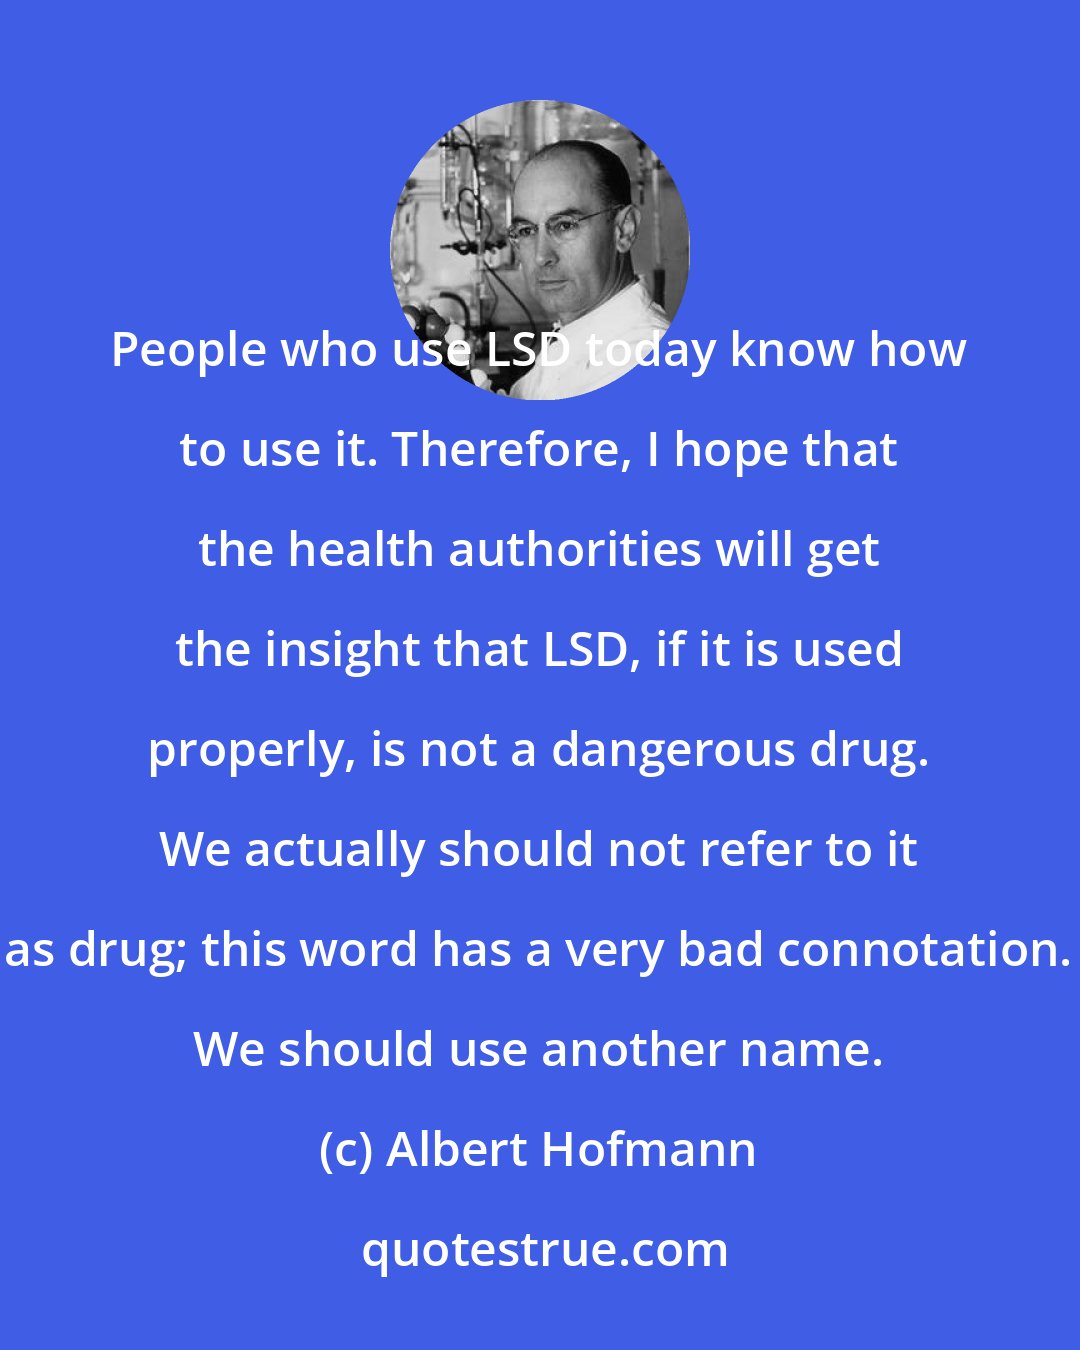 Albert Hofmann: People who use LSD today know how to use it. Therefore, I hope that the health authorities will get the insight that LSD, if it is used properly, is not a dangerous drug. We actually should not refer to it as drug; this word has a very bad connotation. We should use another name.